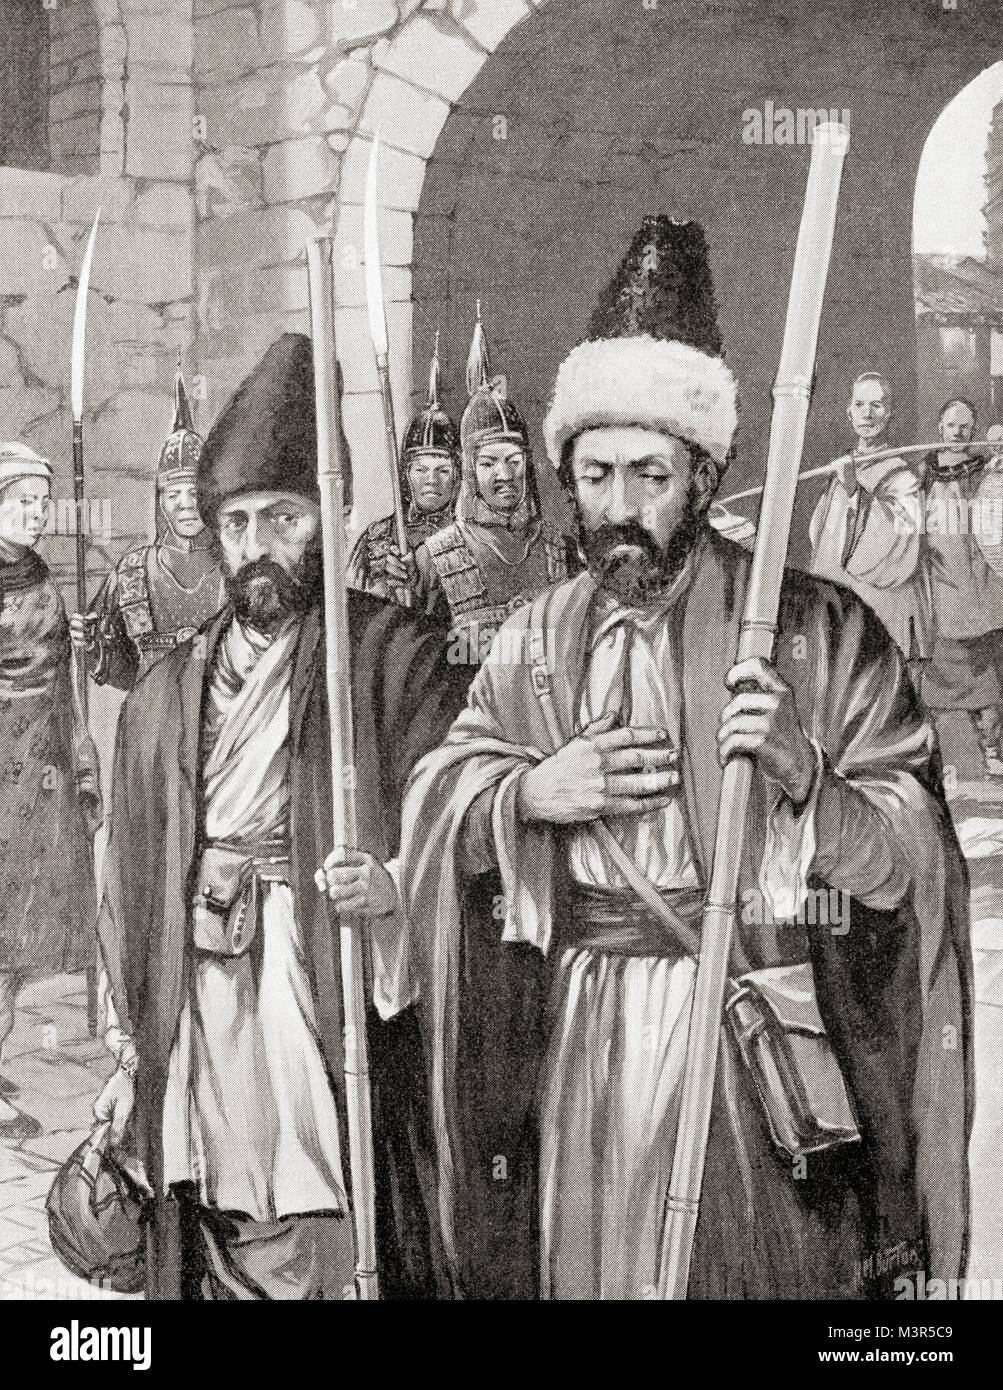 Two monks, with the support of the Byzantine emperor Justinian I, successfully smuggle silkworms into Constantinople by hiding them in bamboo staves, 6th century AD.  From Hutchinson's History of the Nations, published 1915. Stock Photo